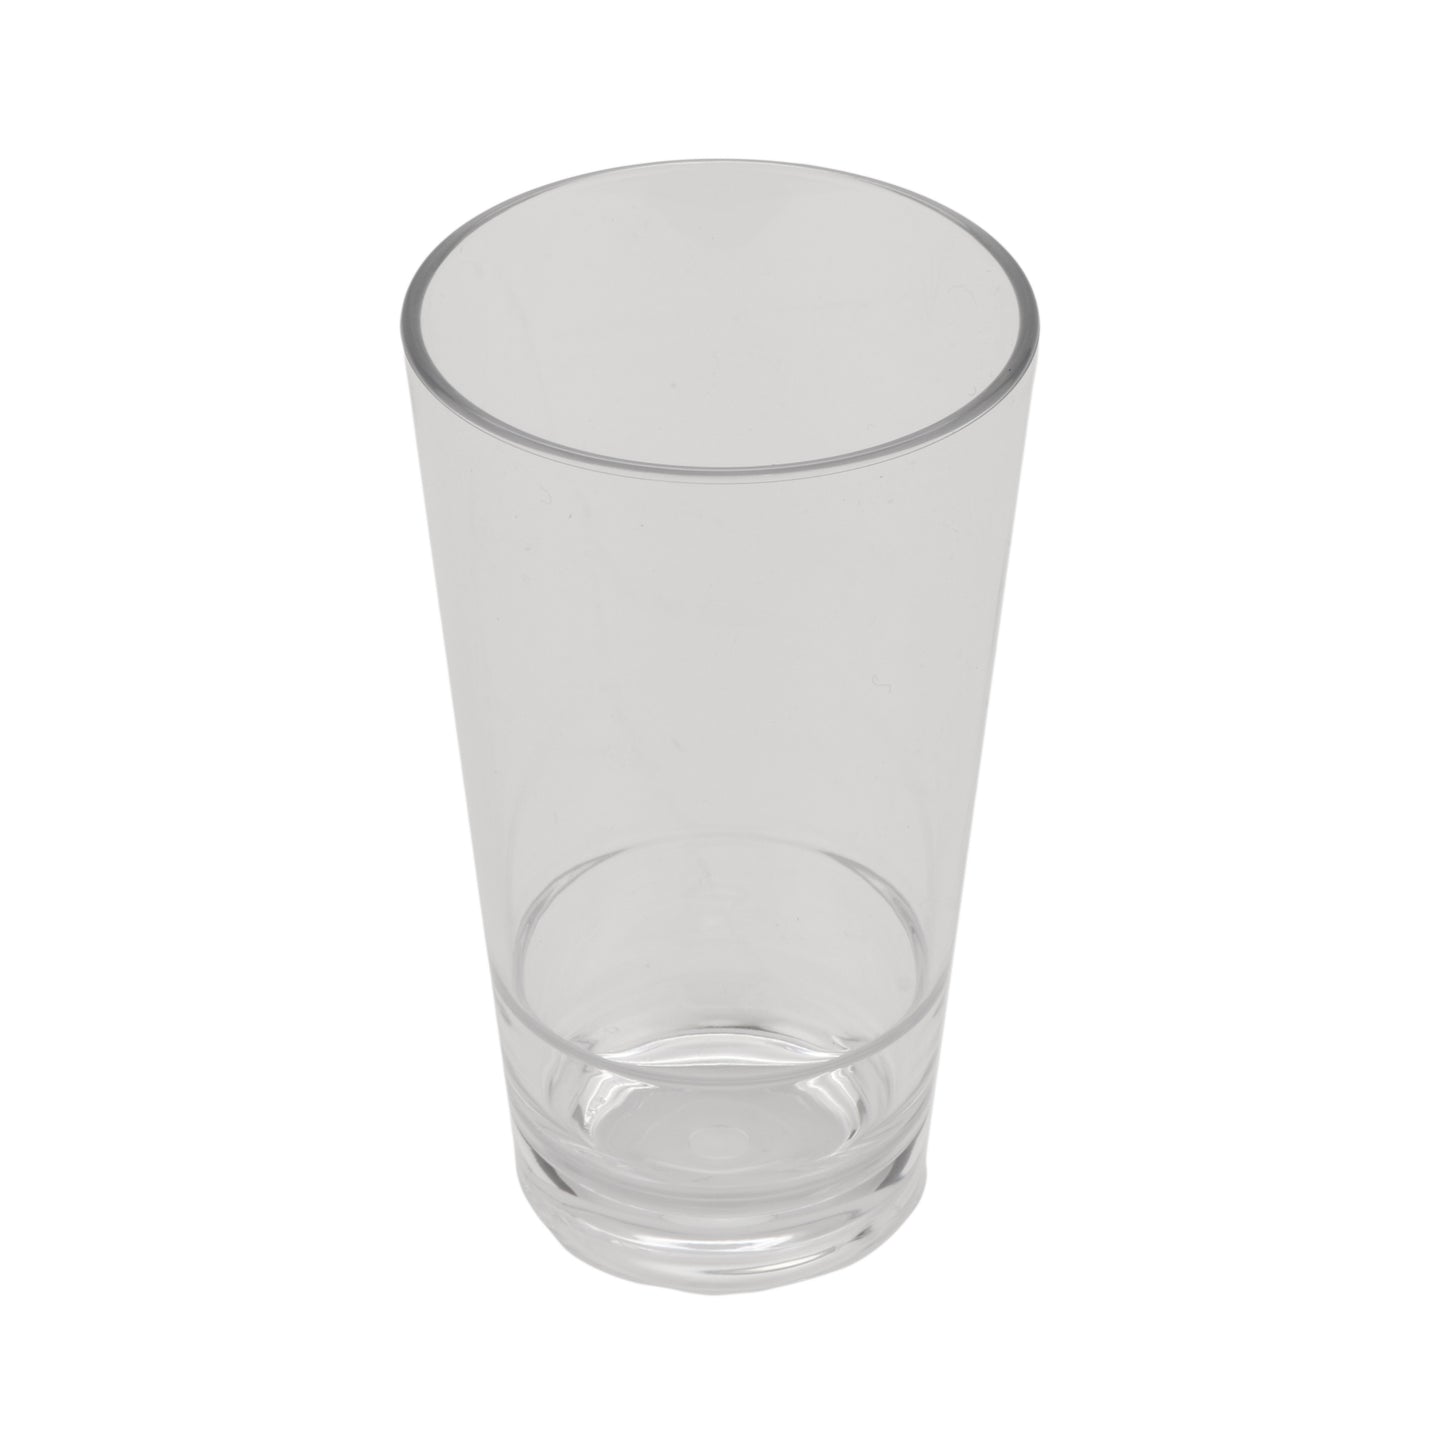 14 oz. (14.8 oz. Rim-Full), 3.2" Stackable Glass, 5.5" Tall (12 Pack)